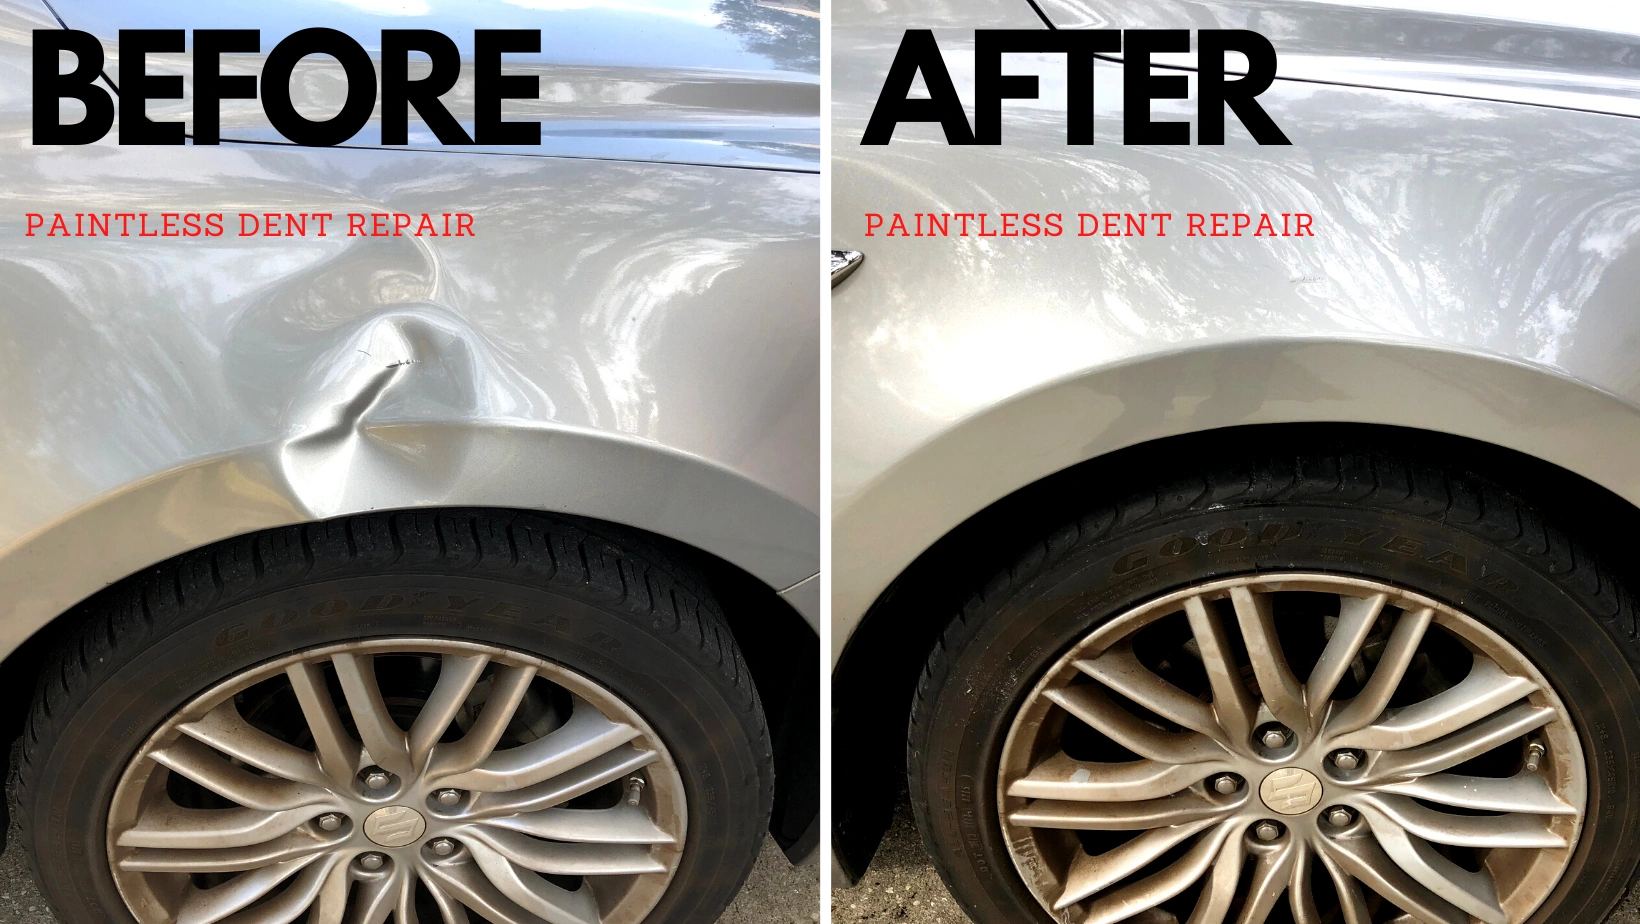 Can you really do paintless dent repair at home?